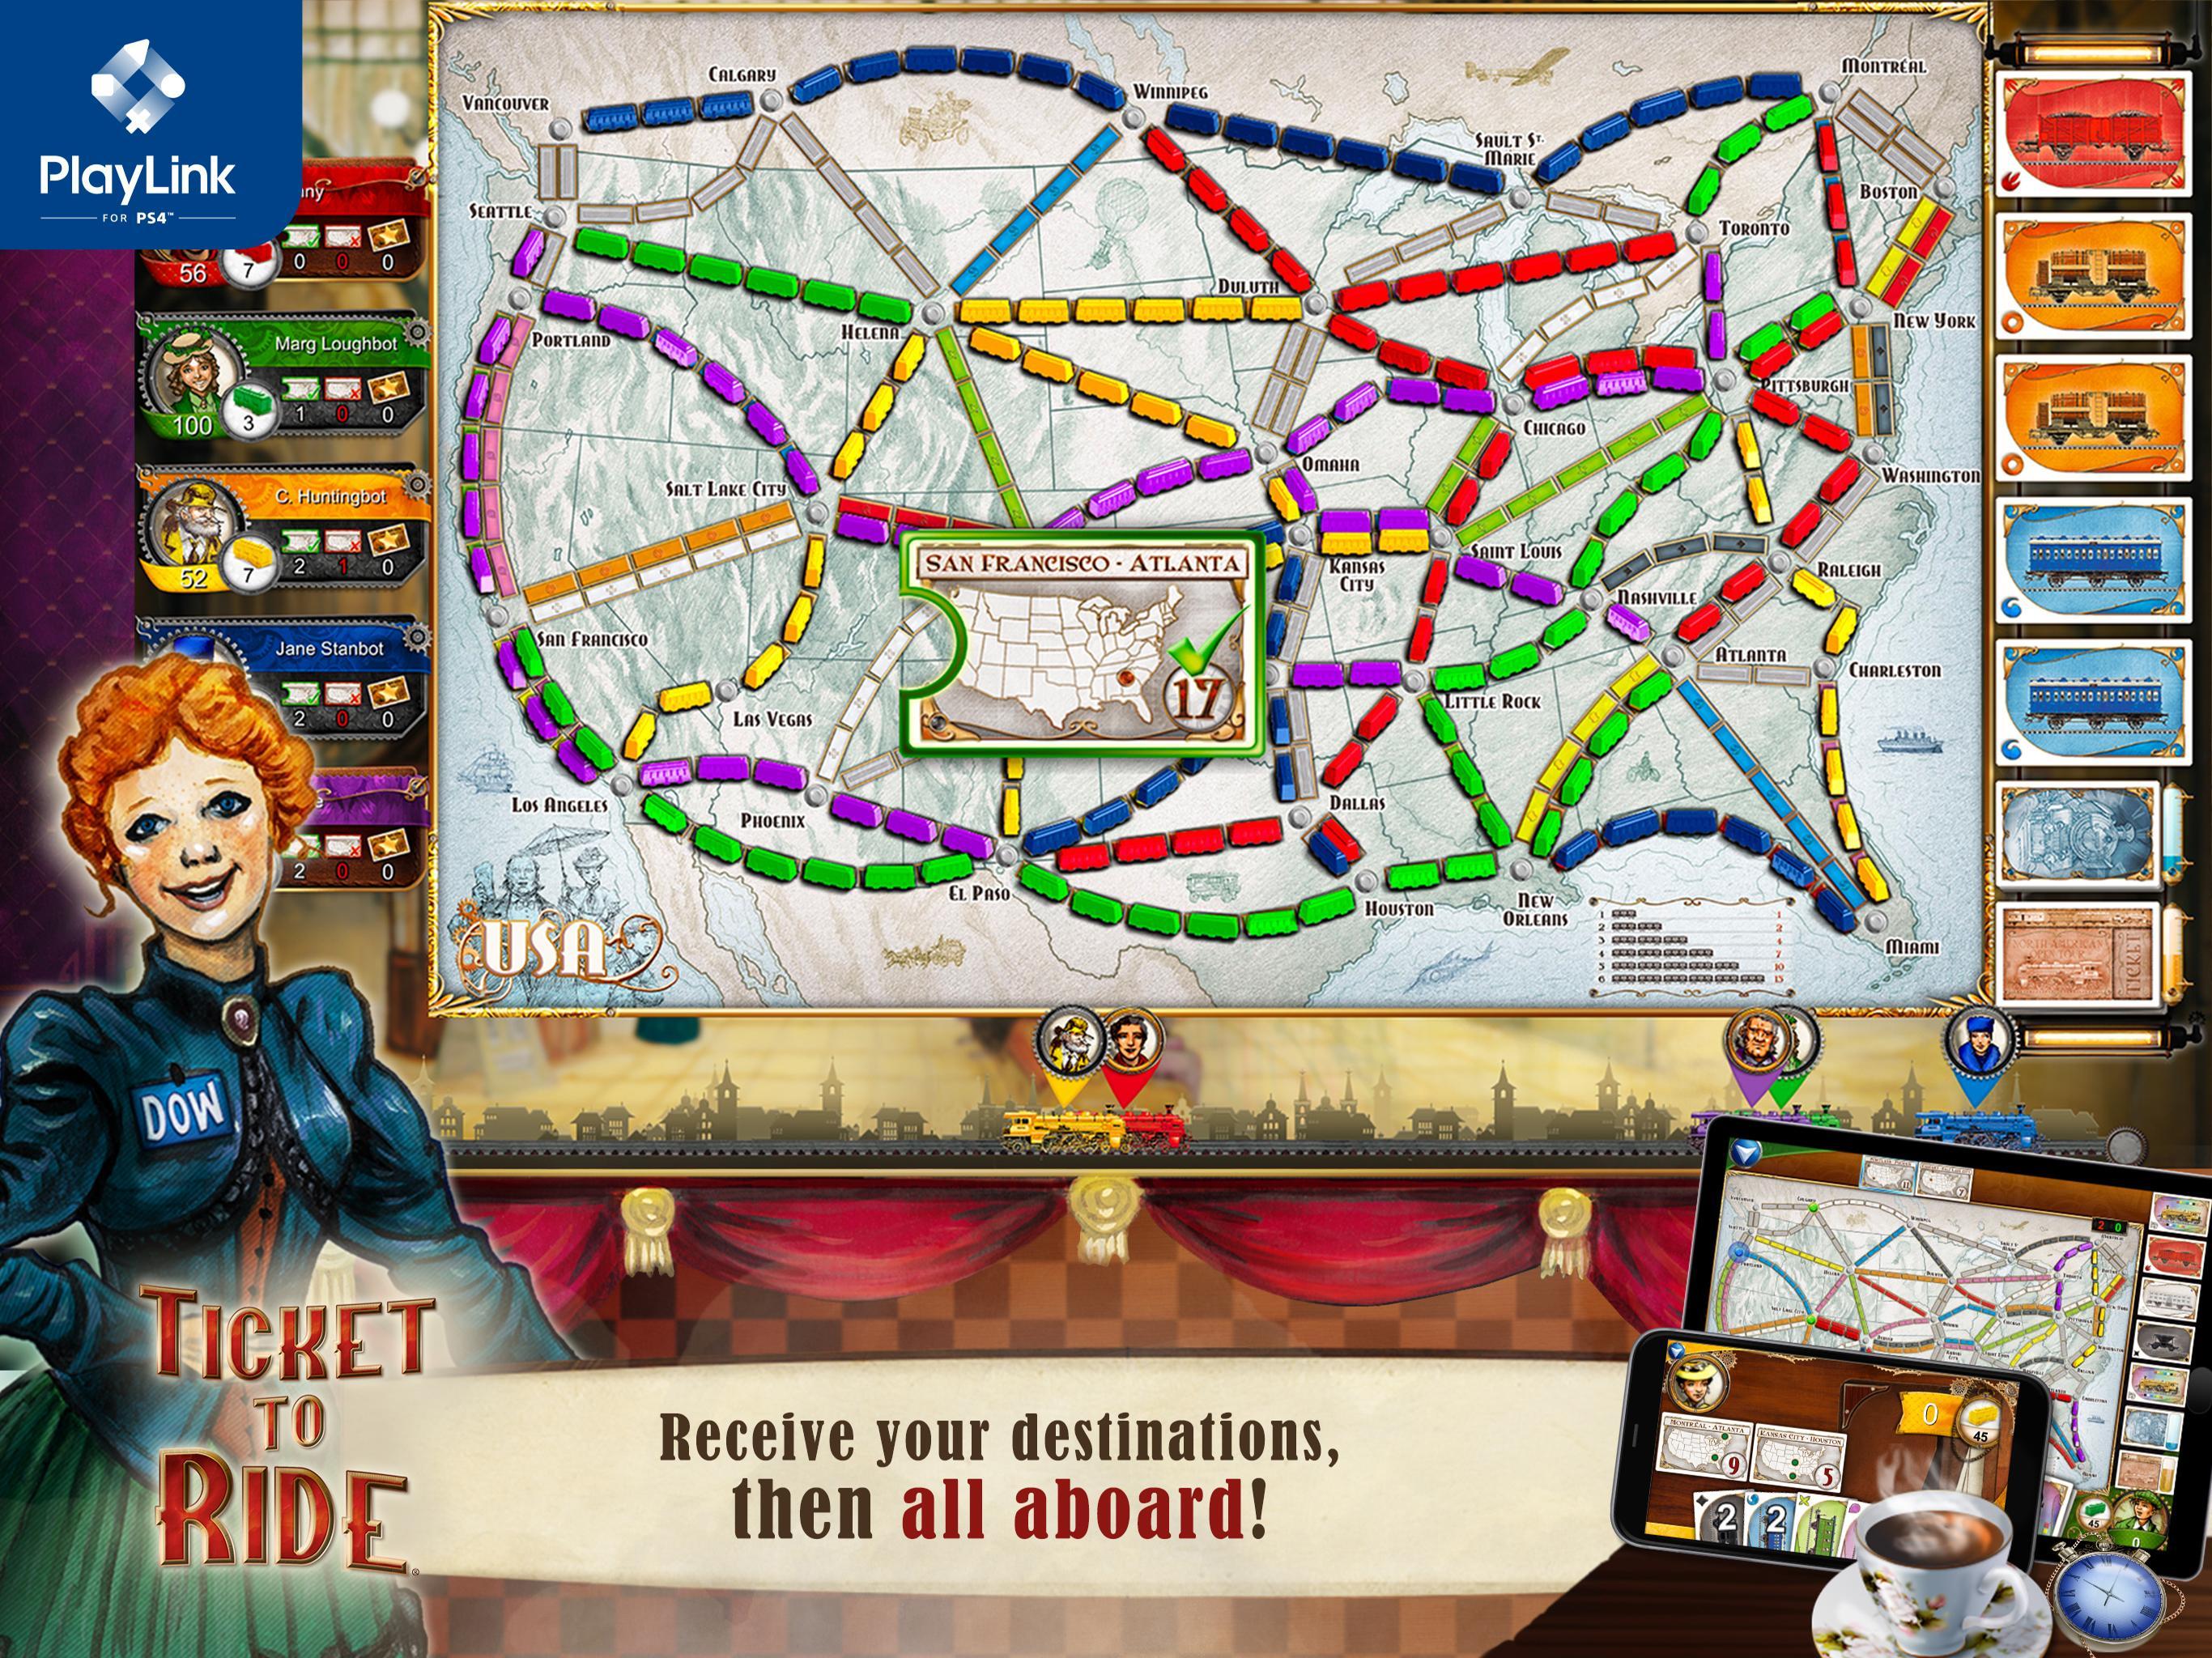 Ticket to Ride for PlayLink 2.7.2-6472-ceb1ea16 Screenshot 7